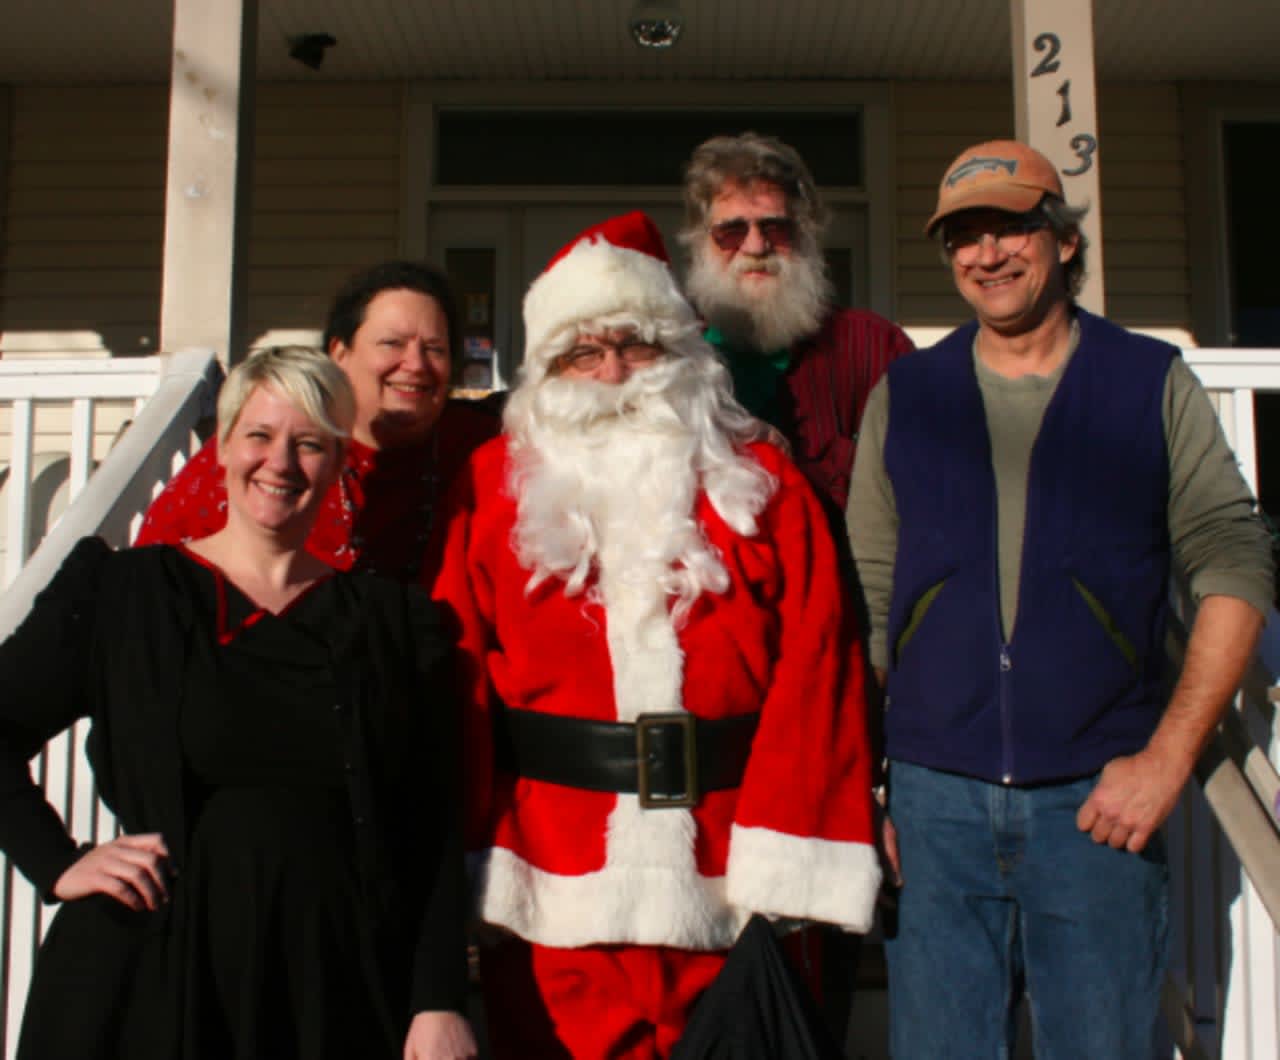 Bonnie Wisnowski, from left, will join bandmates Susan Lang, Bill Wisnowski and Leif Smith, along with Santa at Dec. 6 show in Bethel. 